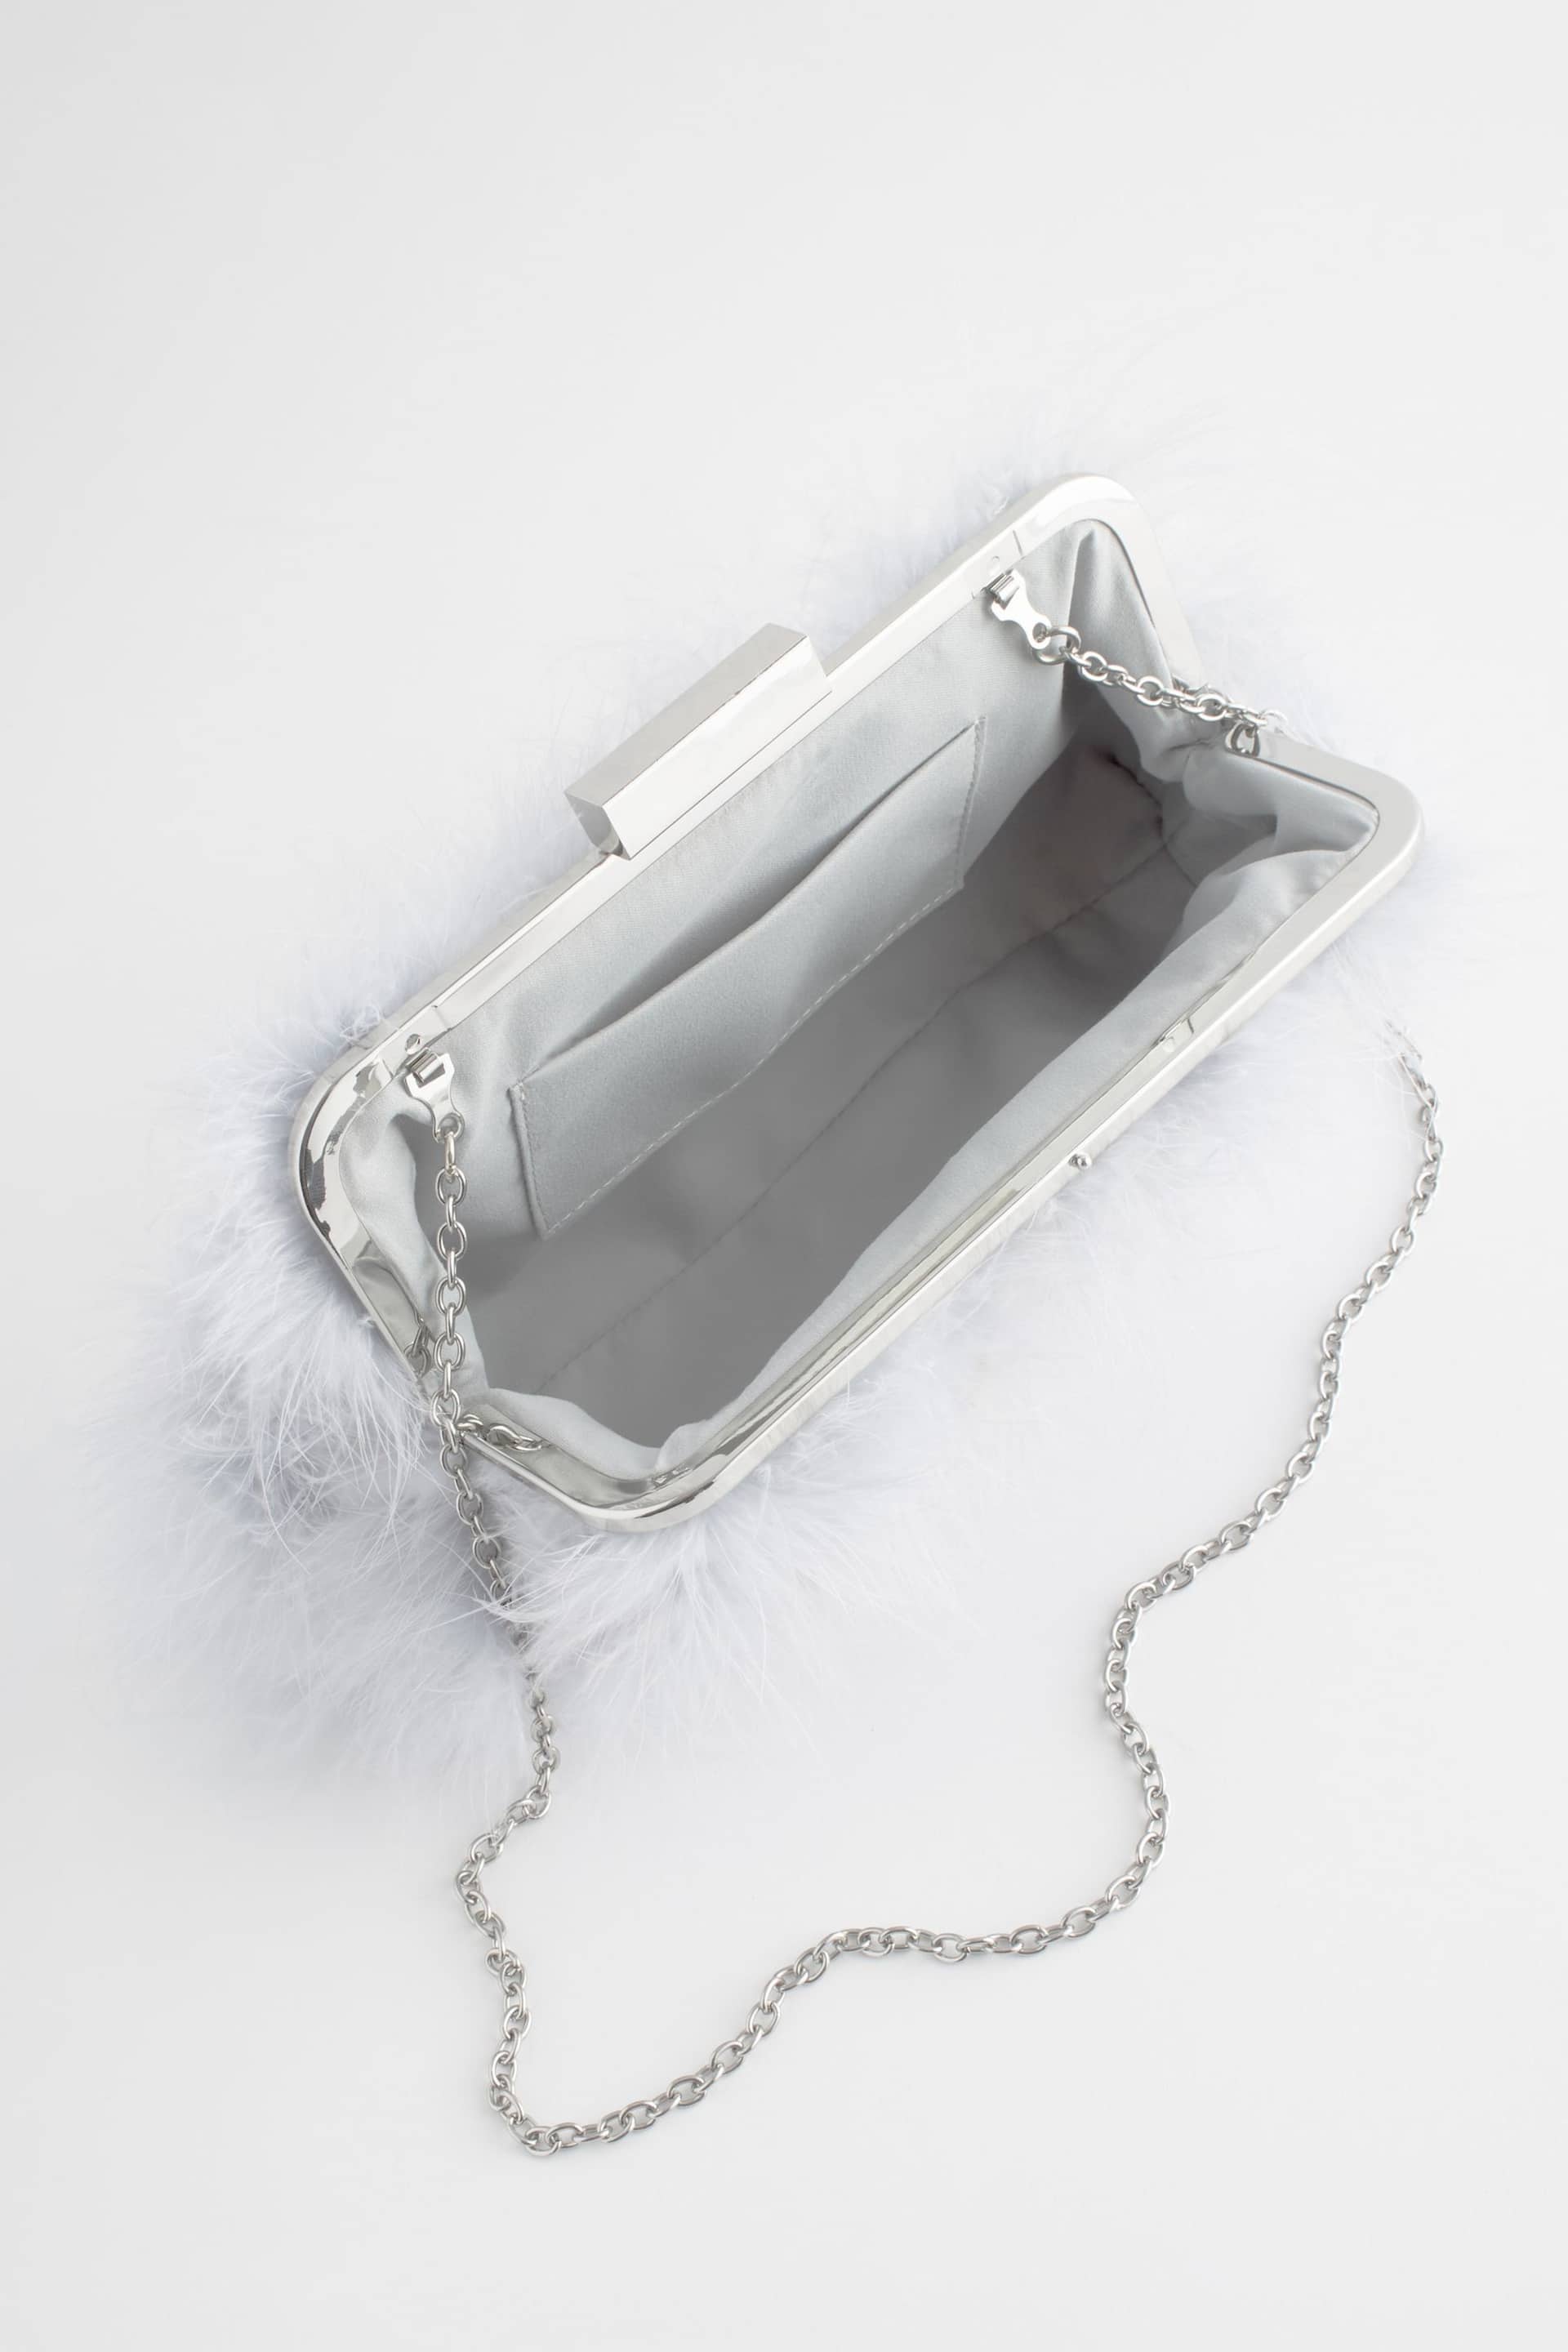 Grey Feather Clutch Bag - Image 8 of 9